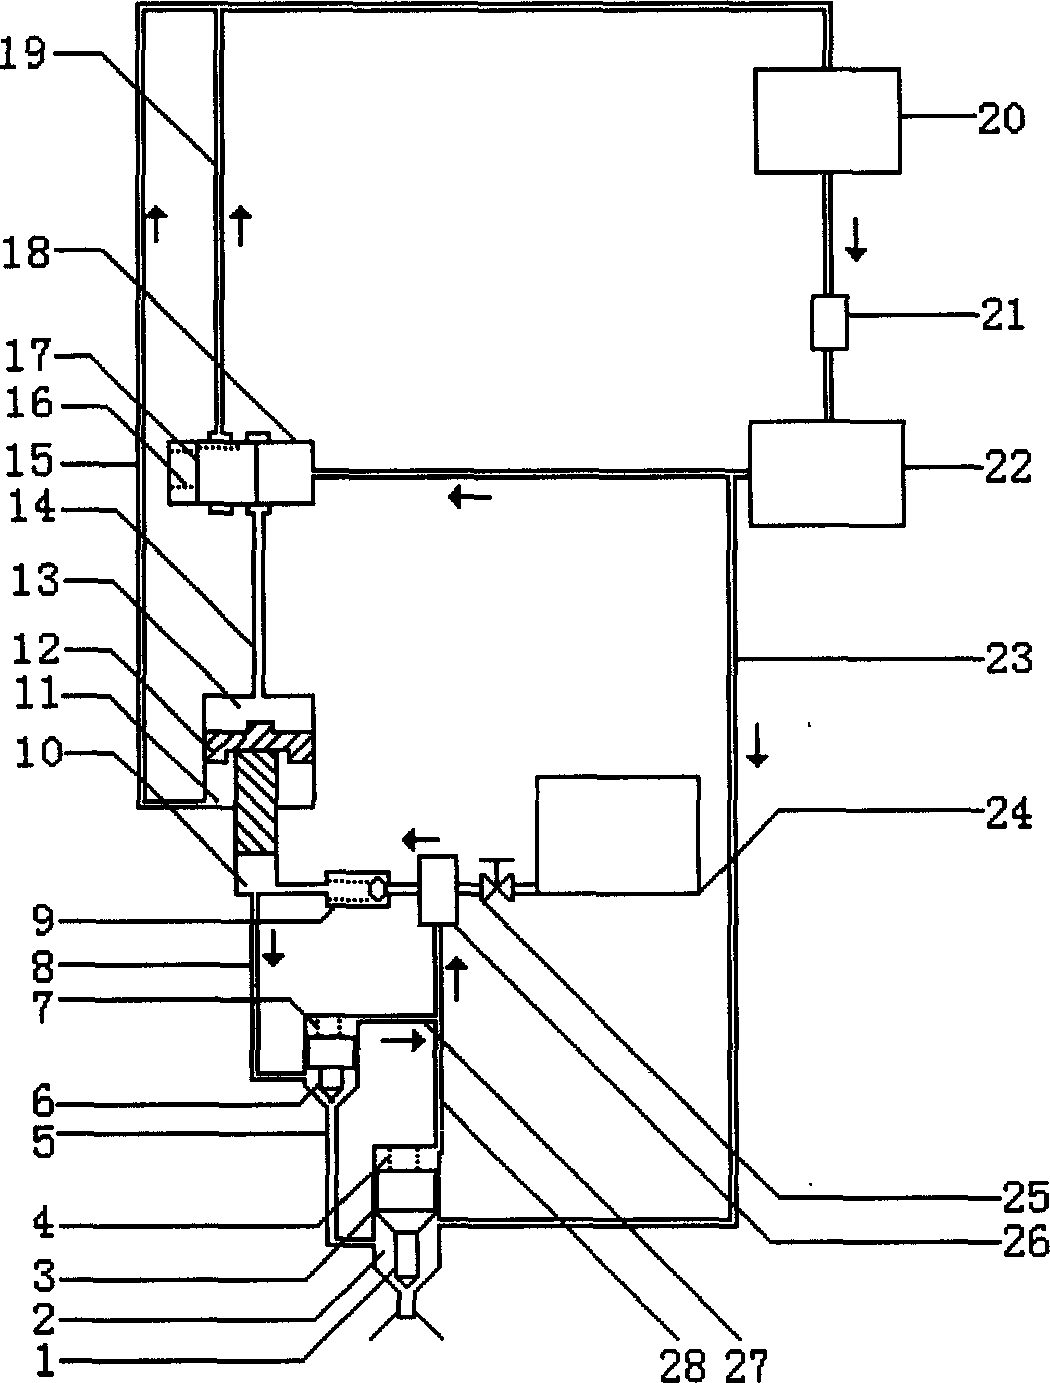 Diesel, dimethylether mixed injection system